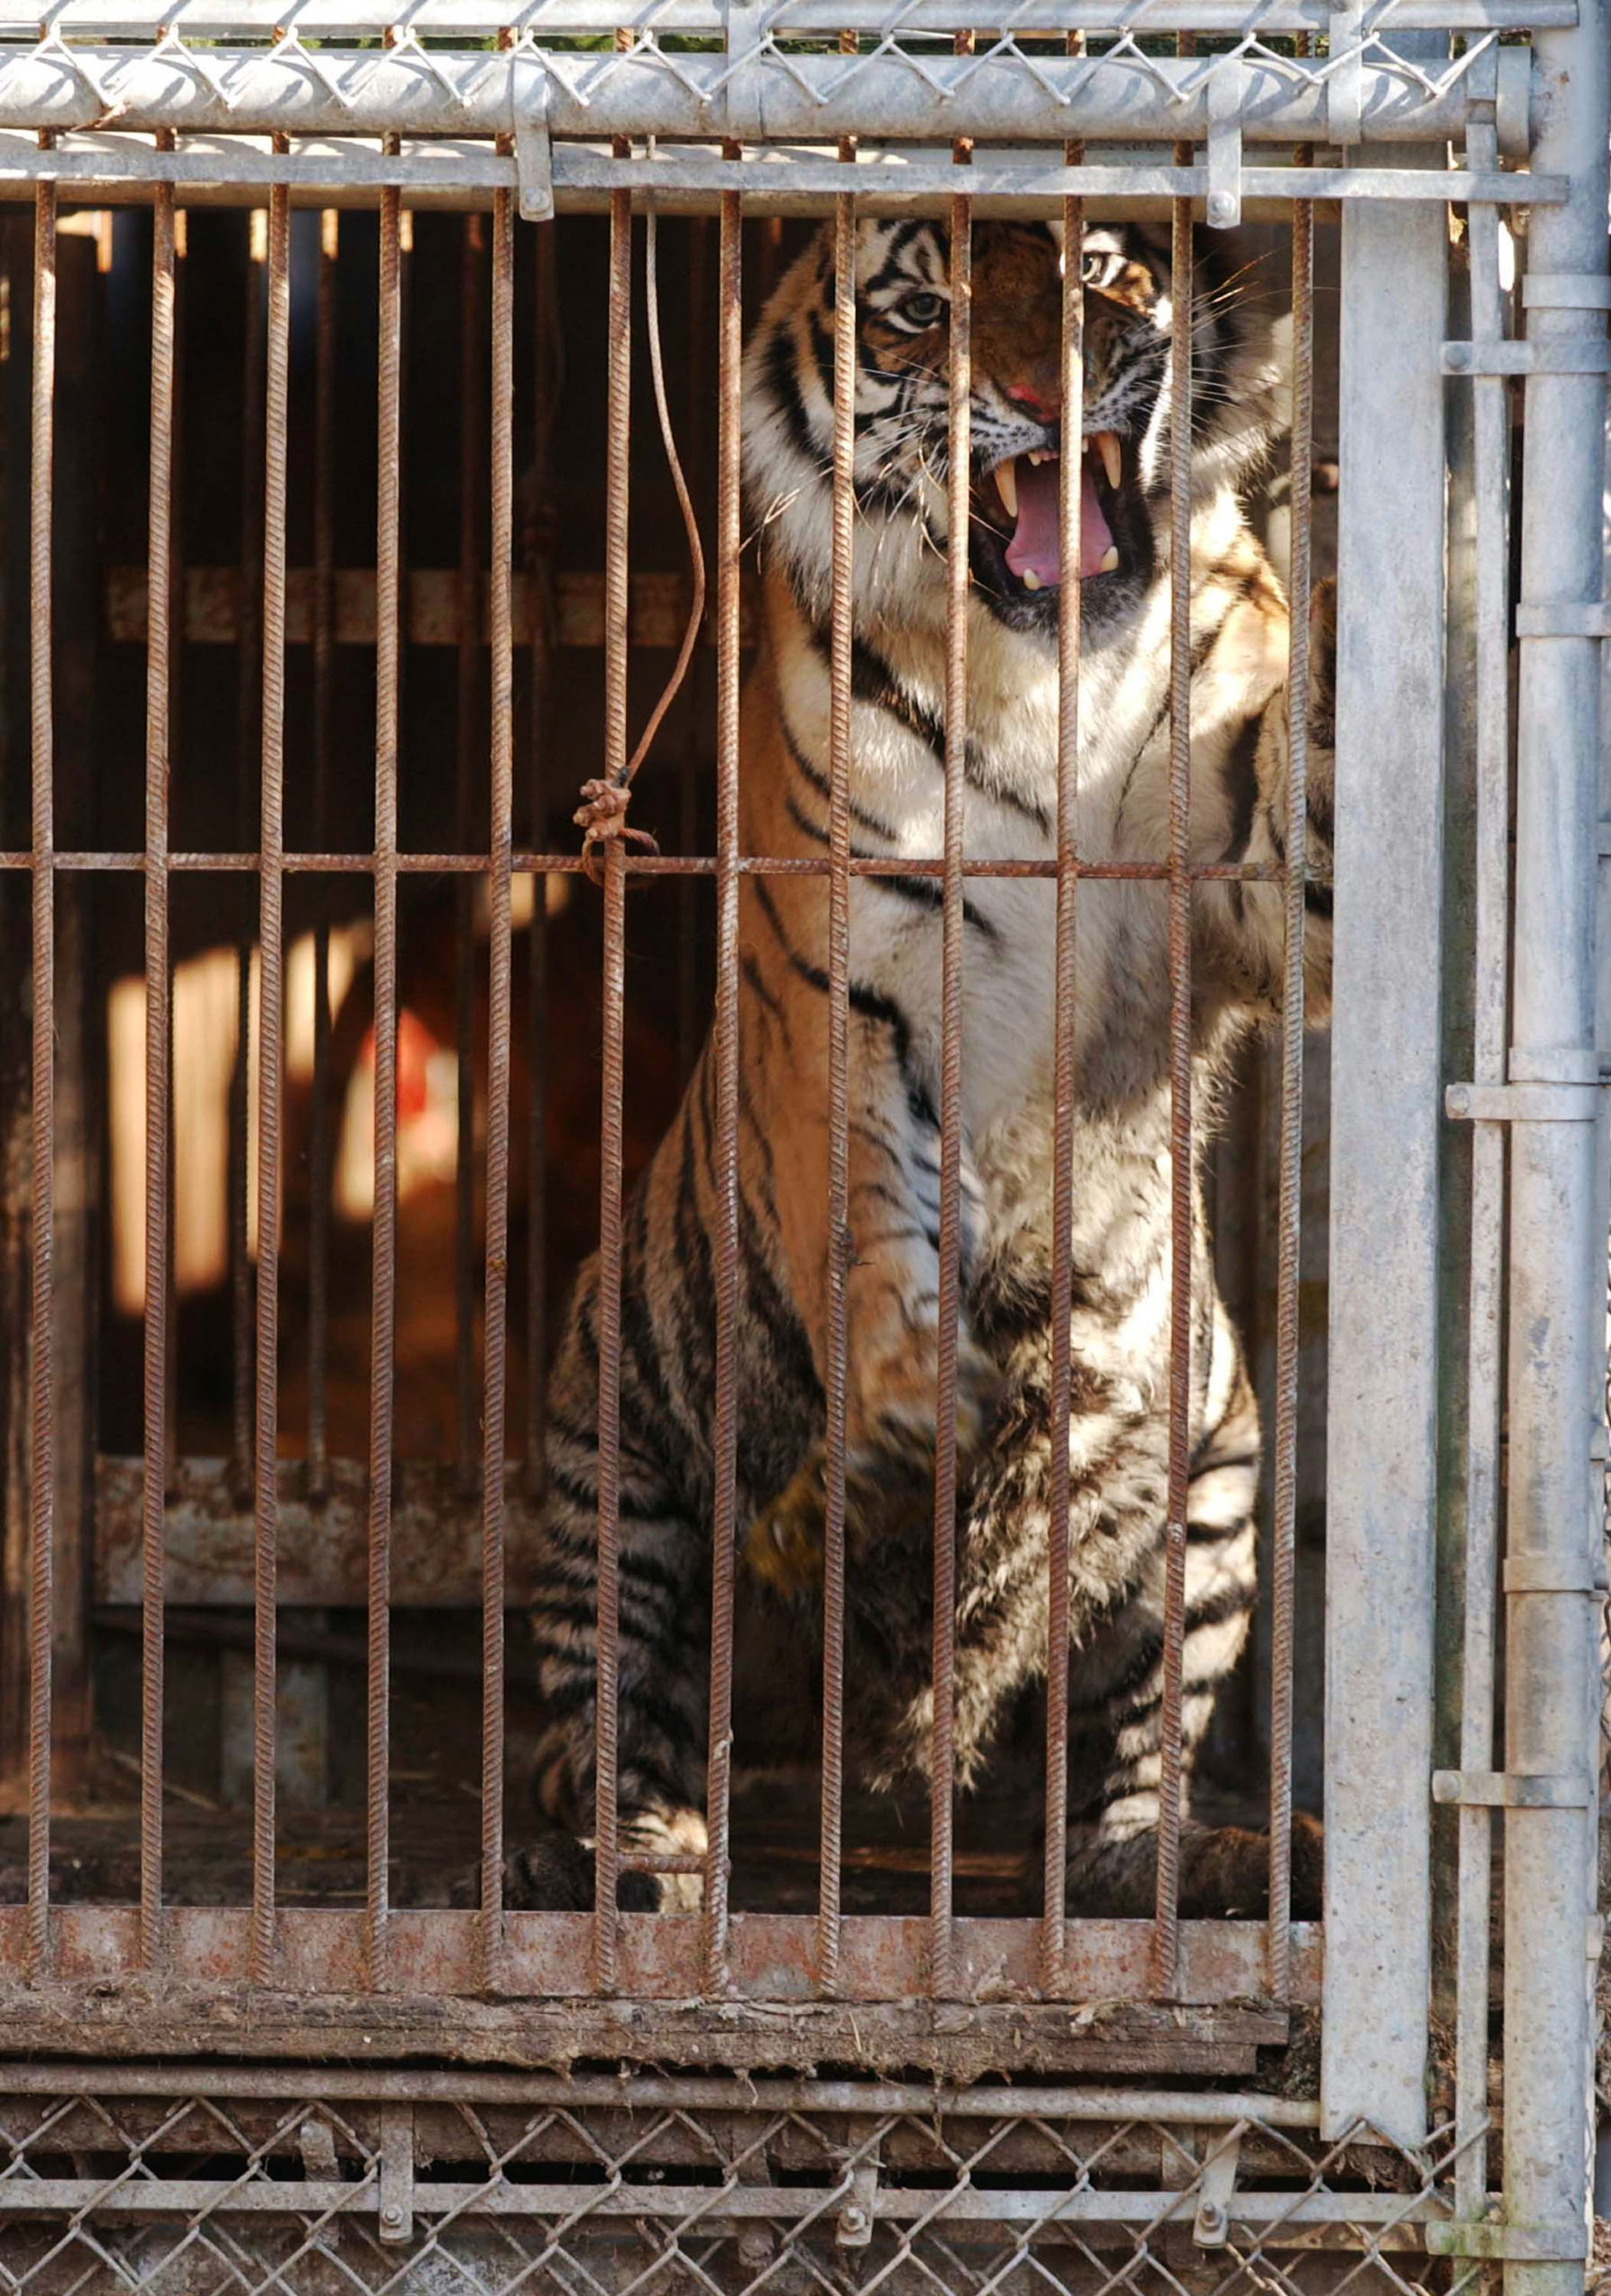 A tiger living in a small cage with accumulated waste awaits rescue. This is one of 24 tigers that IFAW worked with NJ state law enforcement officers to rescue from a private owner. (Photo: IFAW)